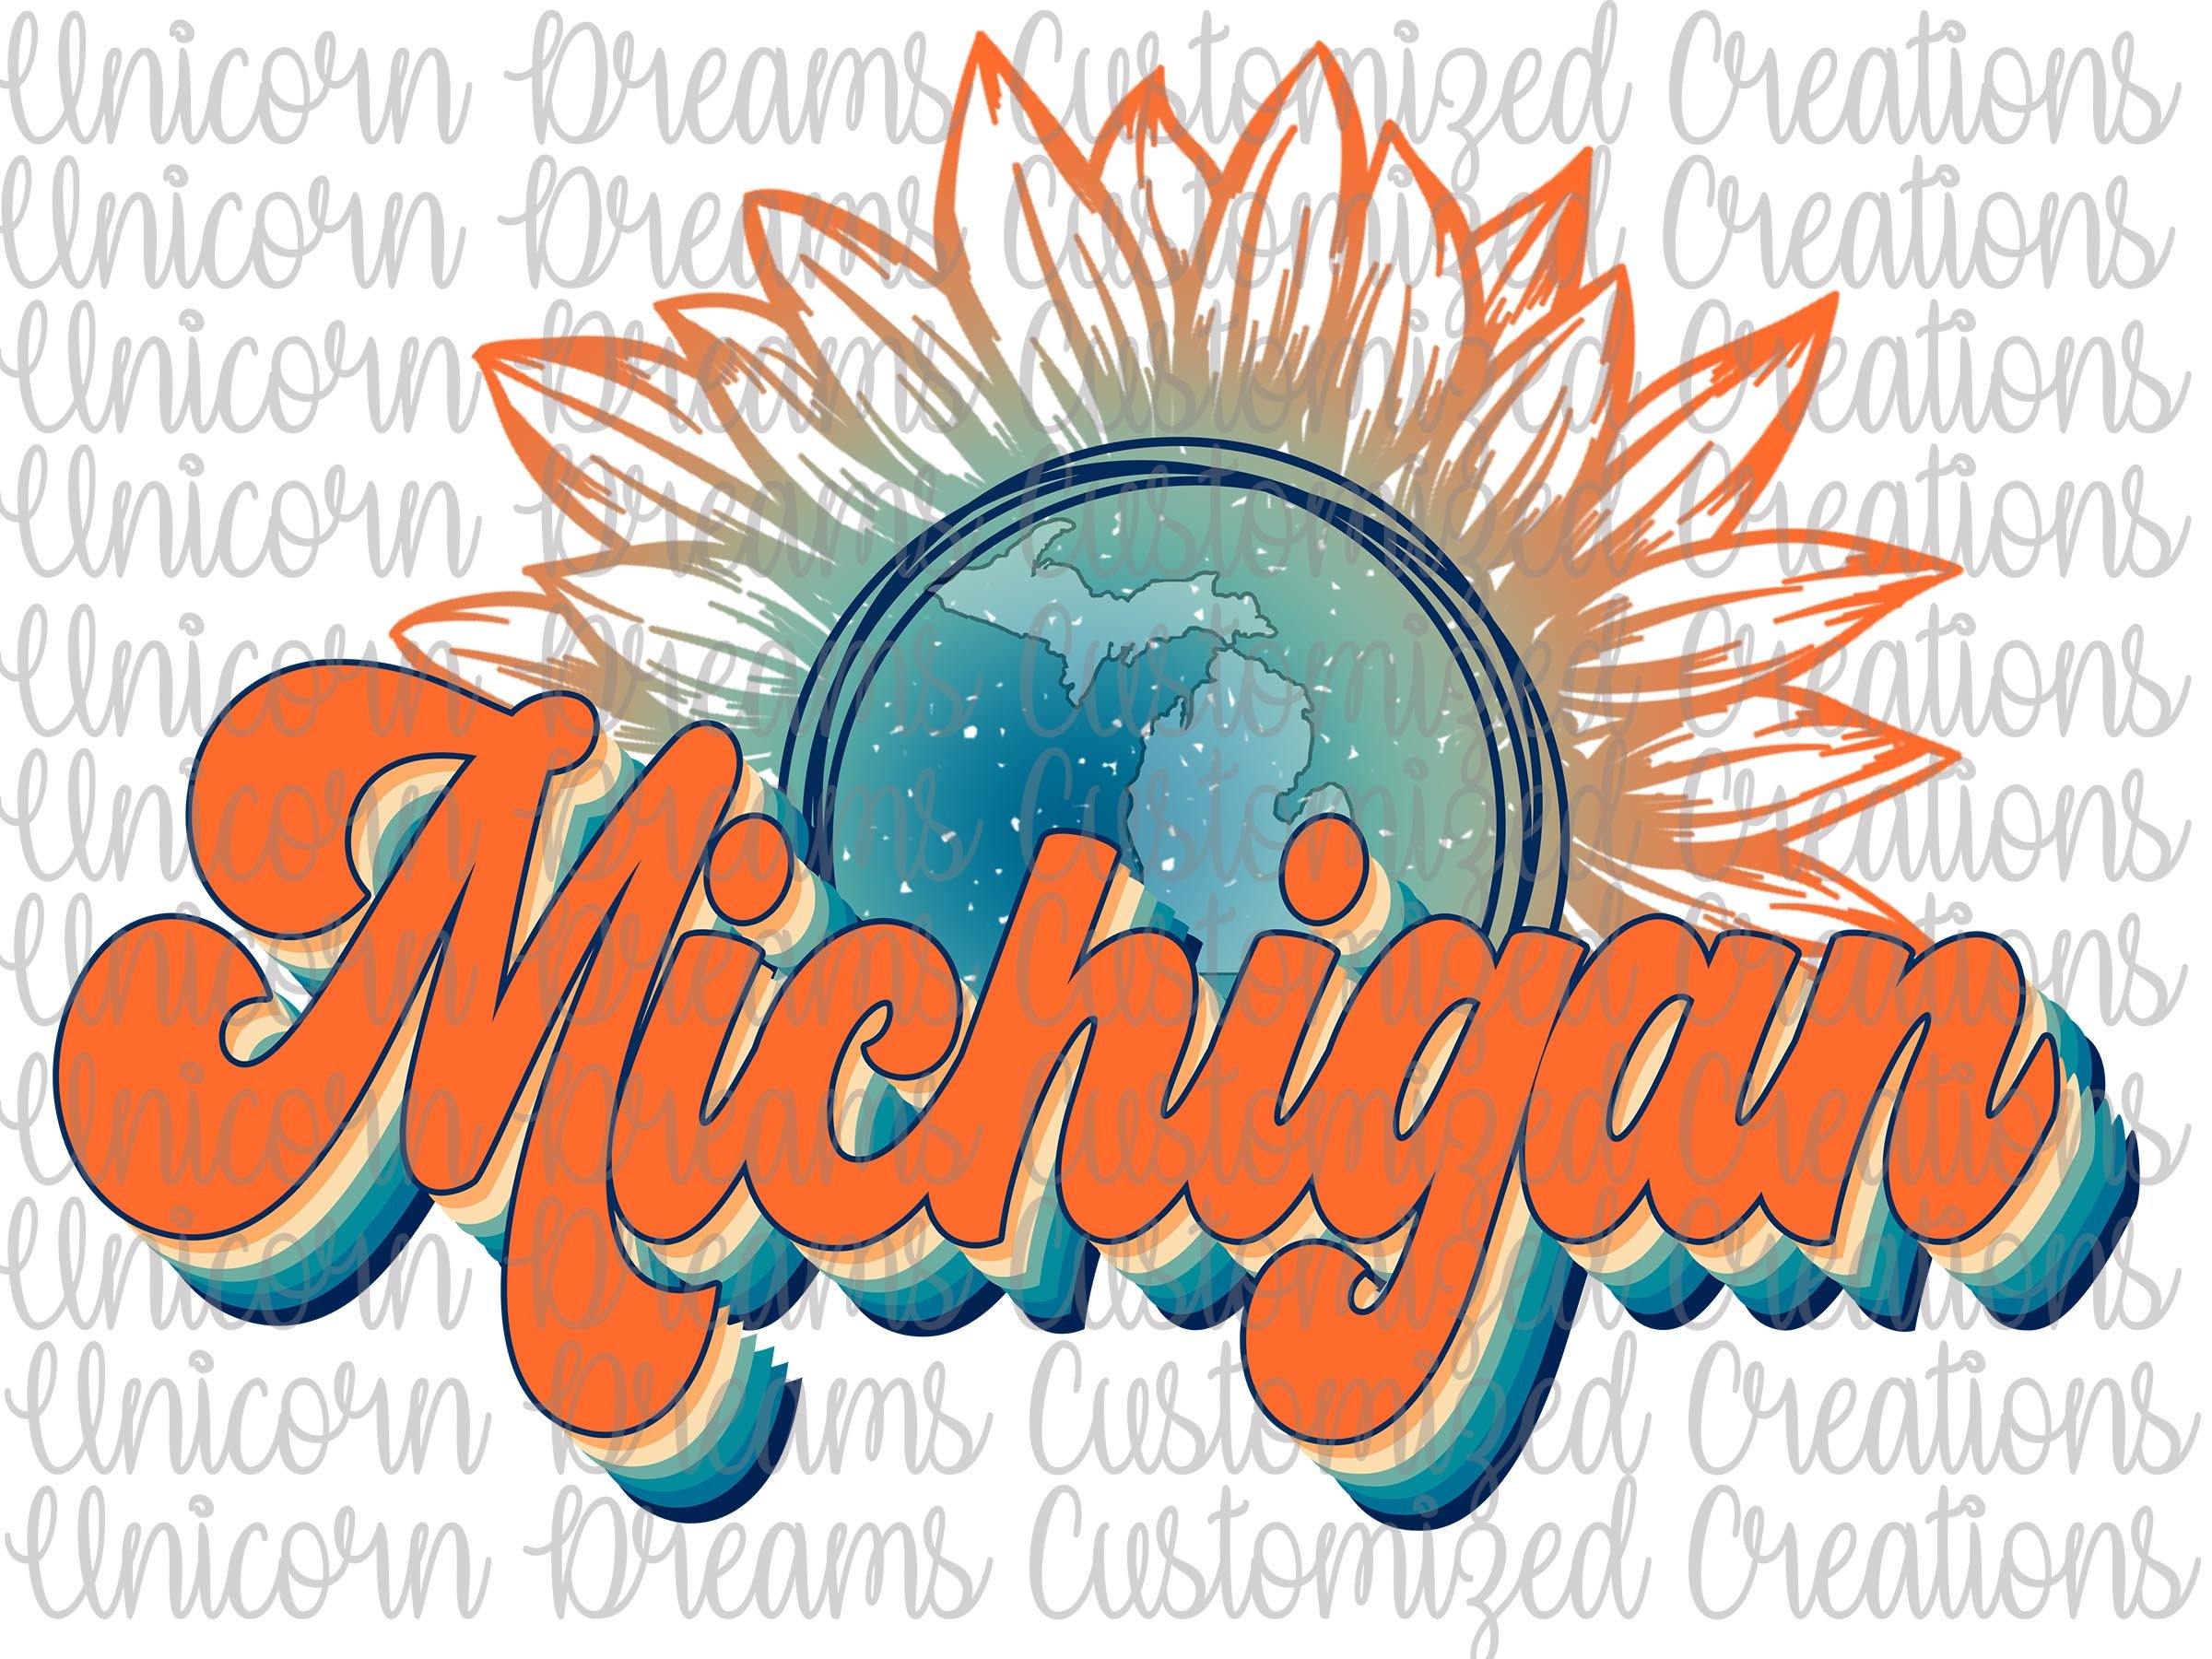 Michigan State Sunflower, Vintage Colors PNG Digital Download, Sublimation Design - Unicorn Dreams Customized Creations